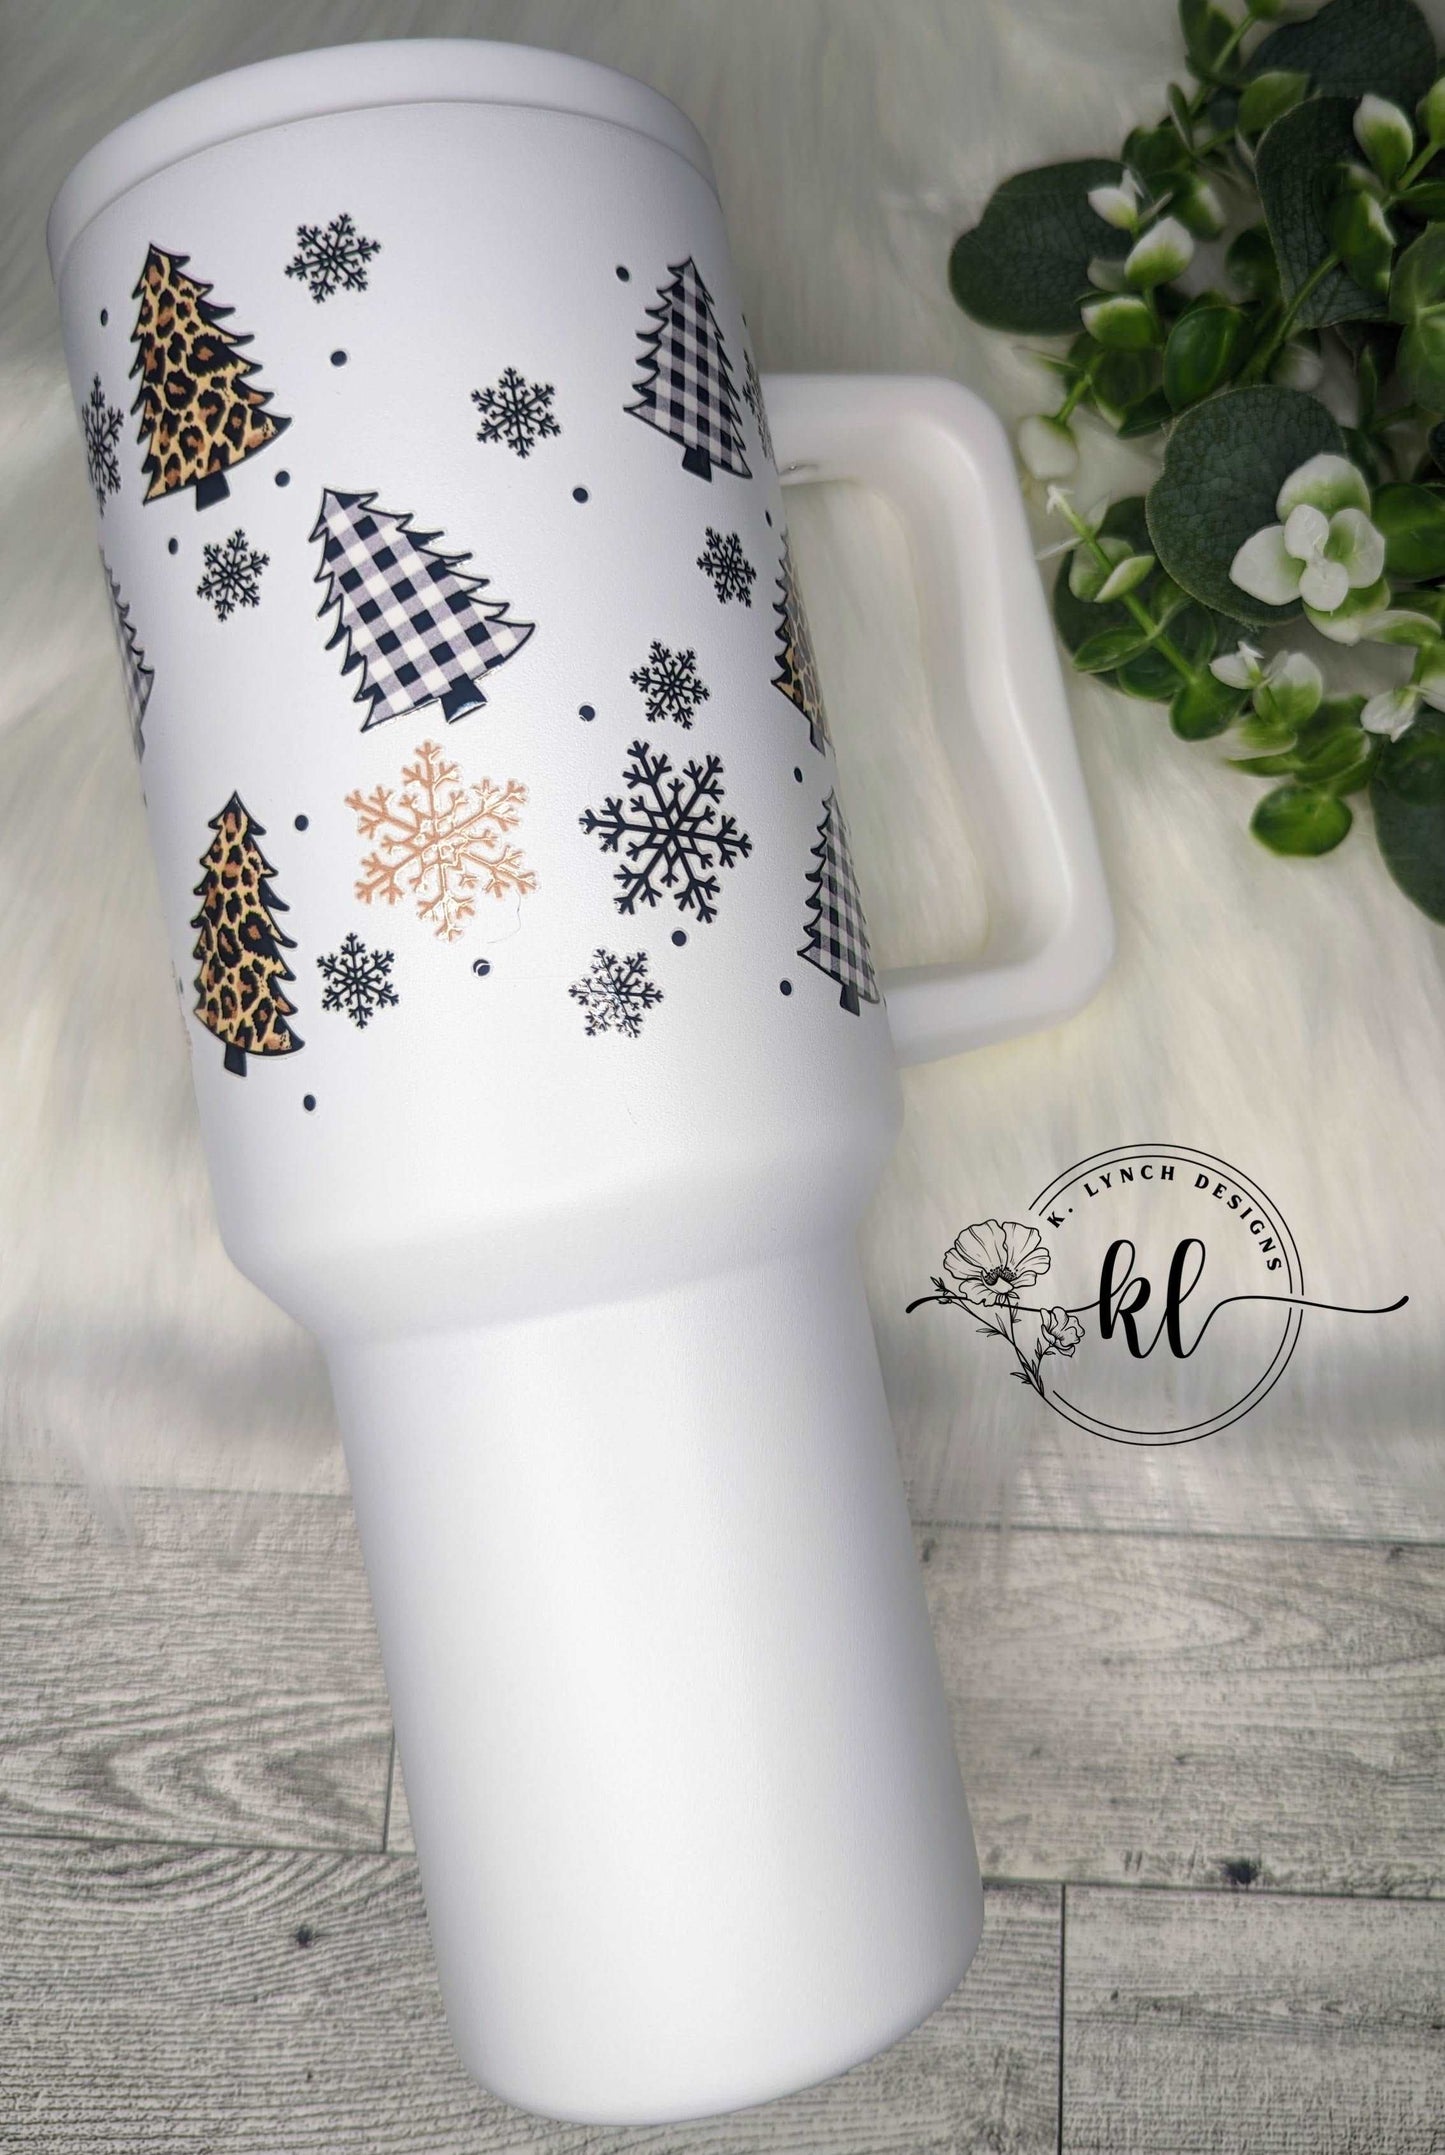 40 oz. Handle Tumbler w/Leopard Print and Plaid Christmas Trees and Fun Snowflakes